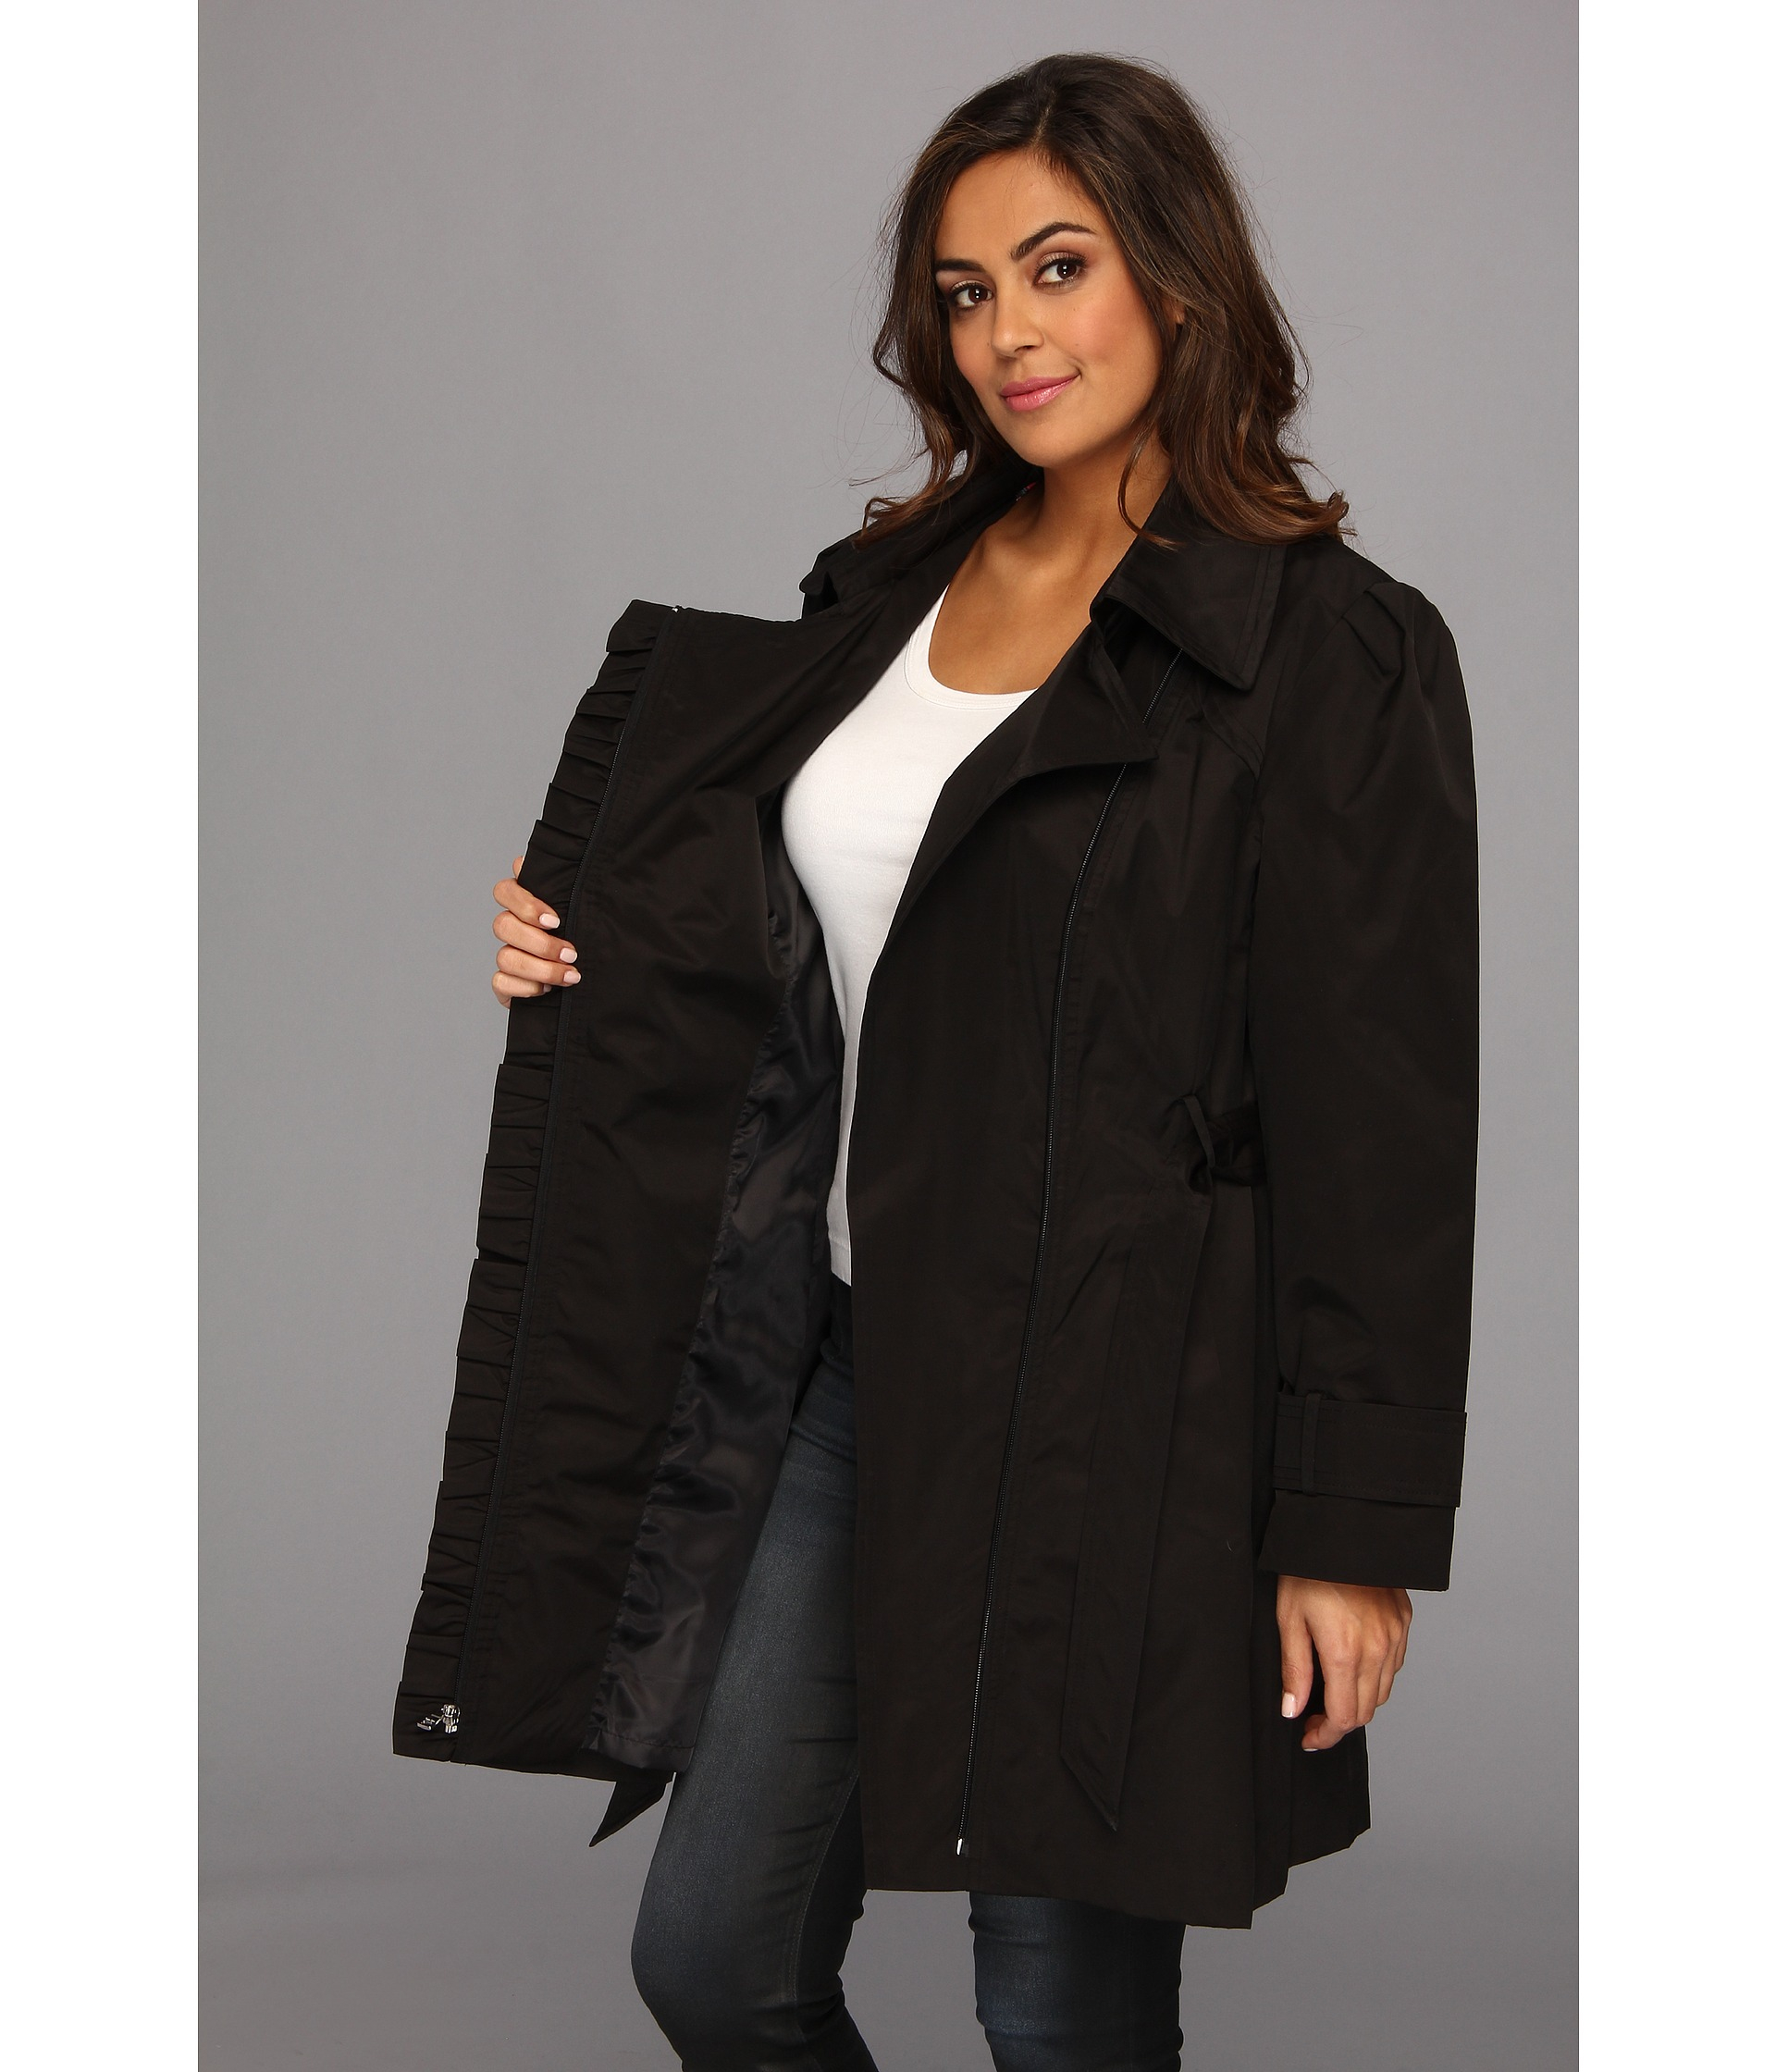 Lyst - Jessica Simpson Plus Size Ruffle Trim Belted Trench Coat in Black